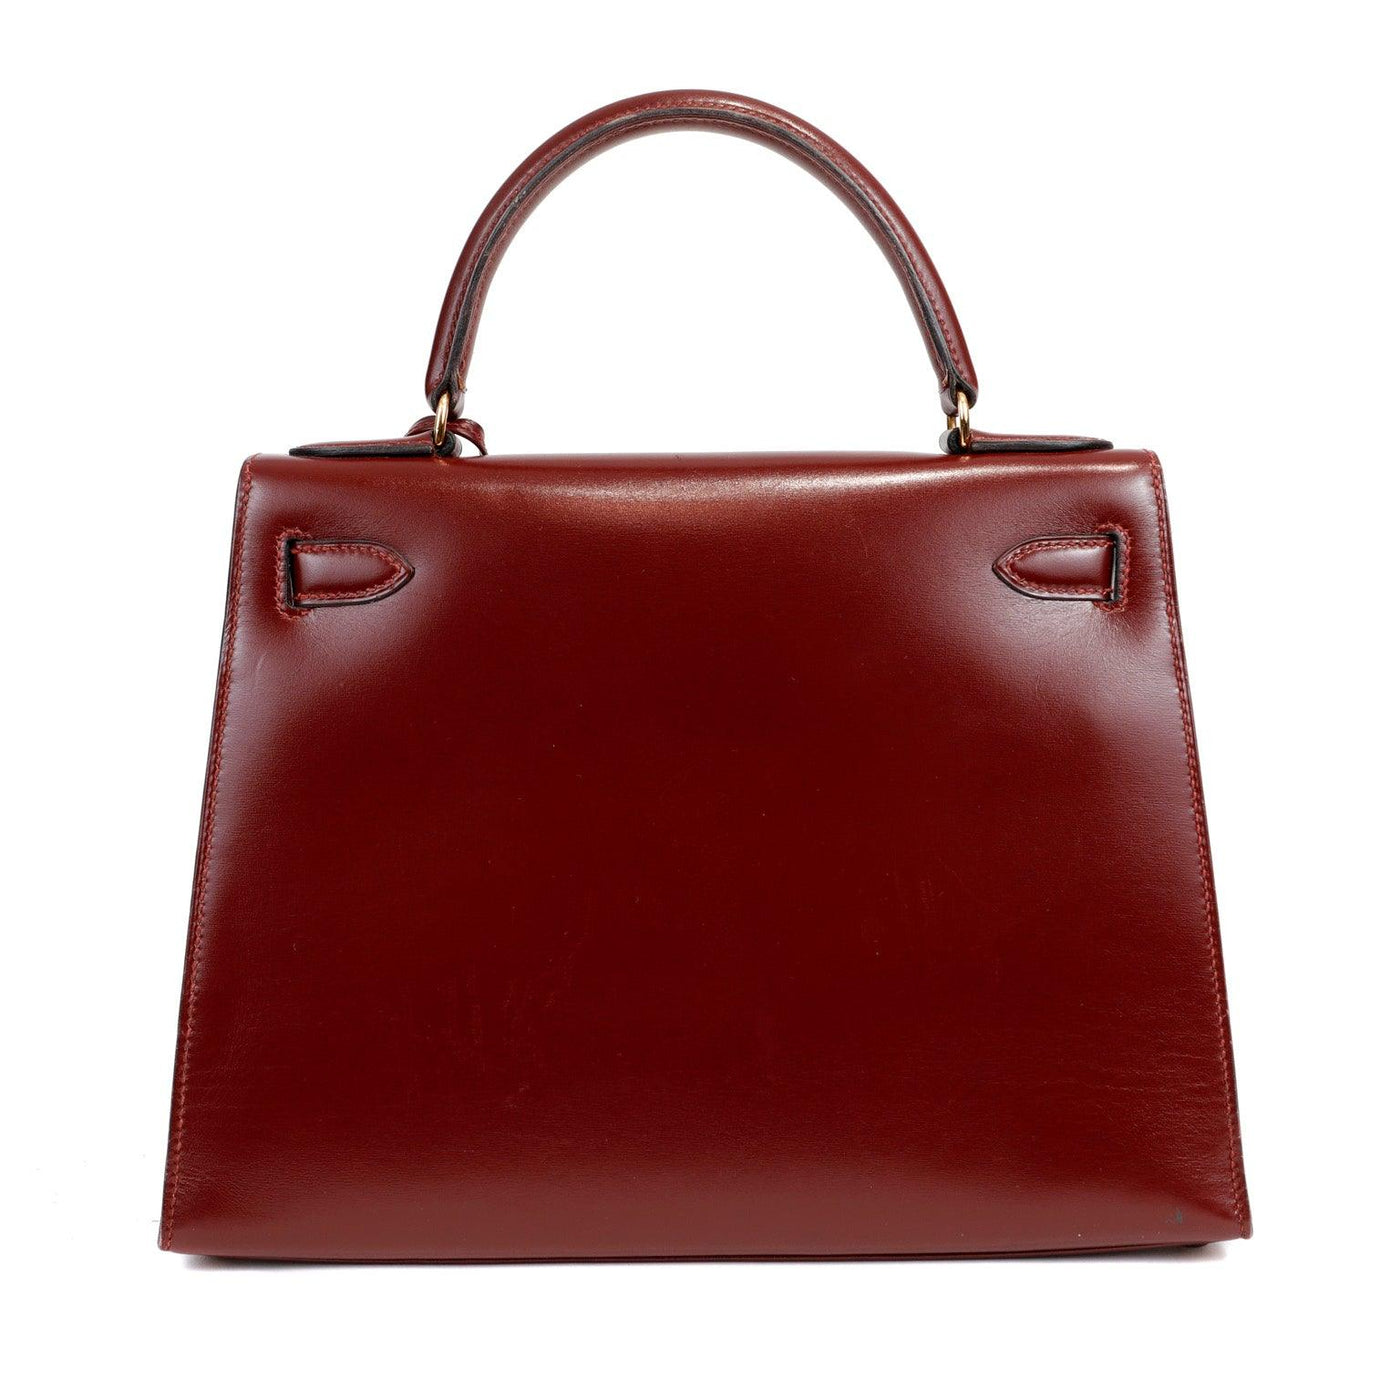 Hermès 28cm Vintage Dark Red Box Calf Kelly with Gold Hardware - Only Authentics